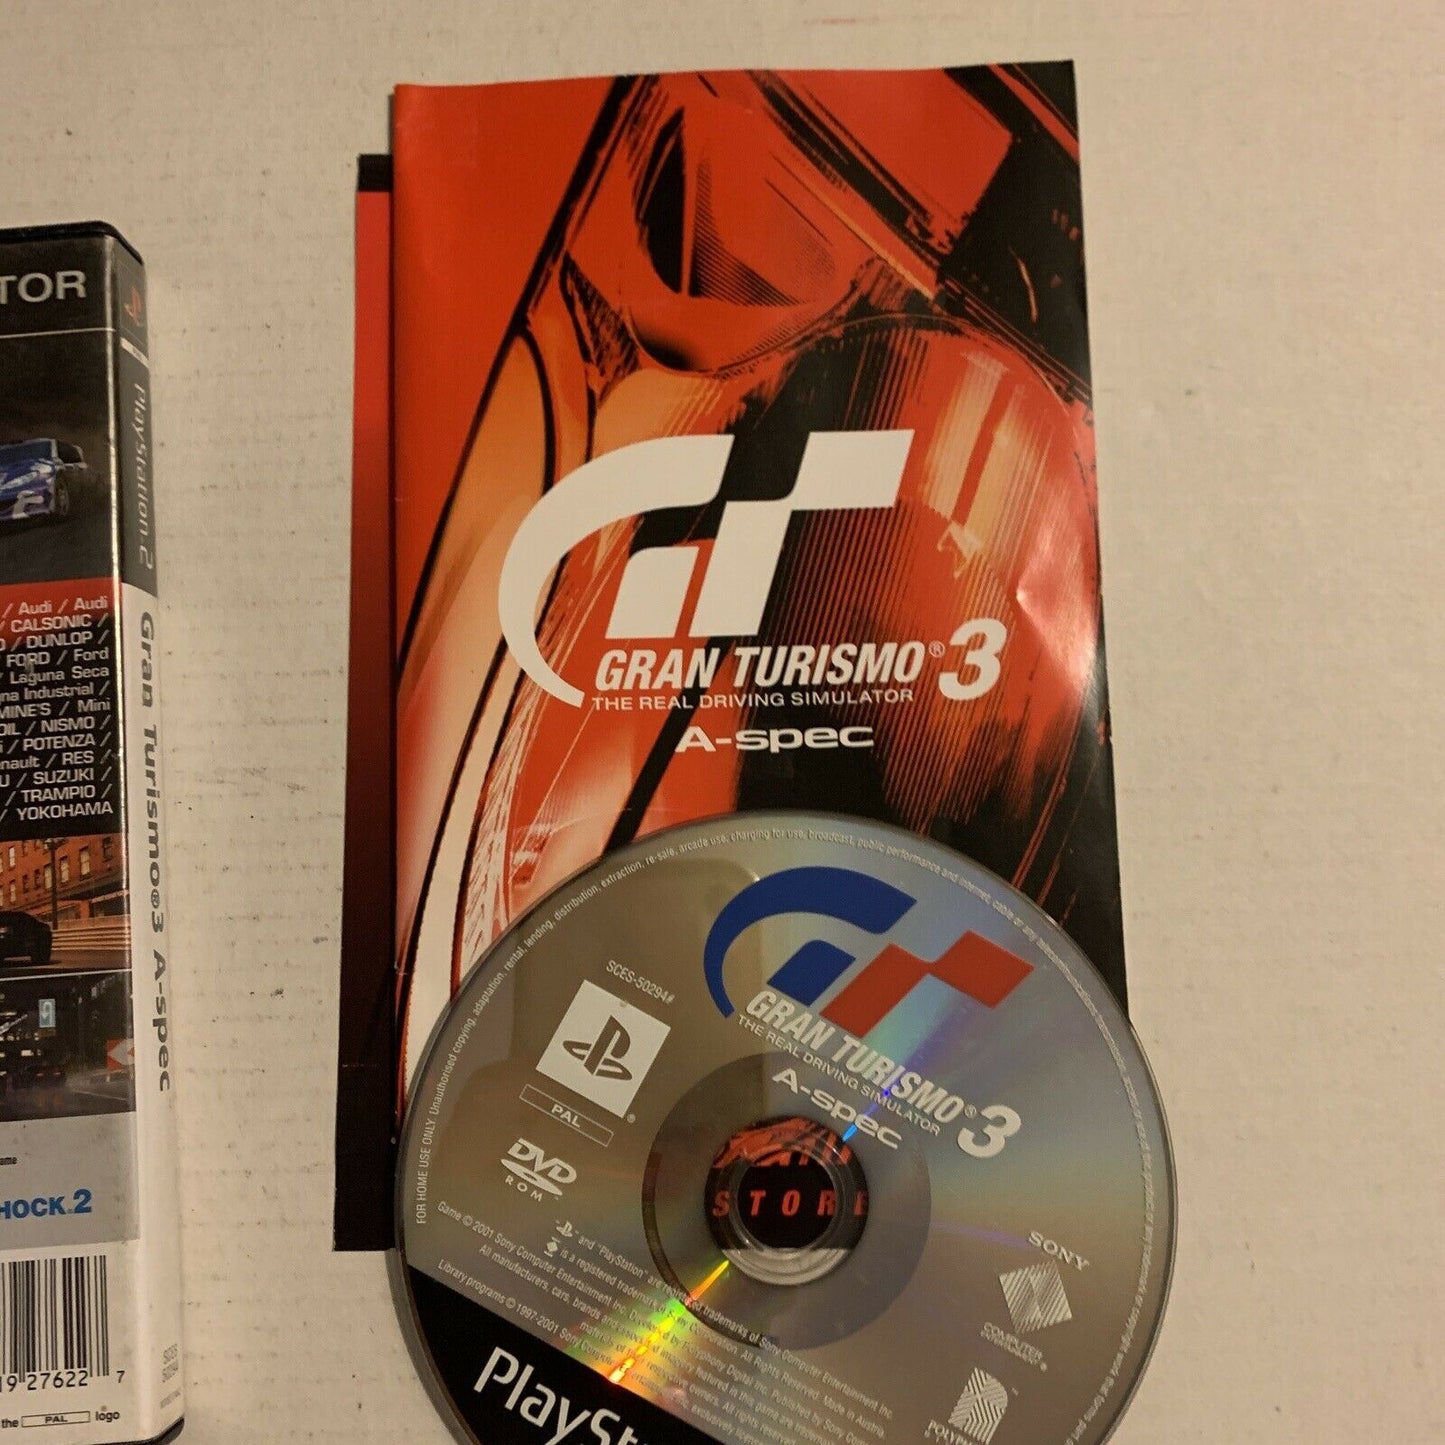 Gran Turismo 3: A -Spec Platinum - PS2 Playstation 2 PAL Game with Manual